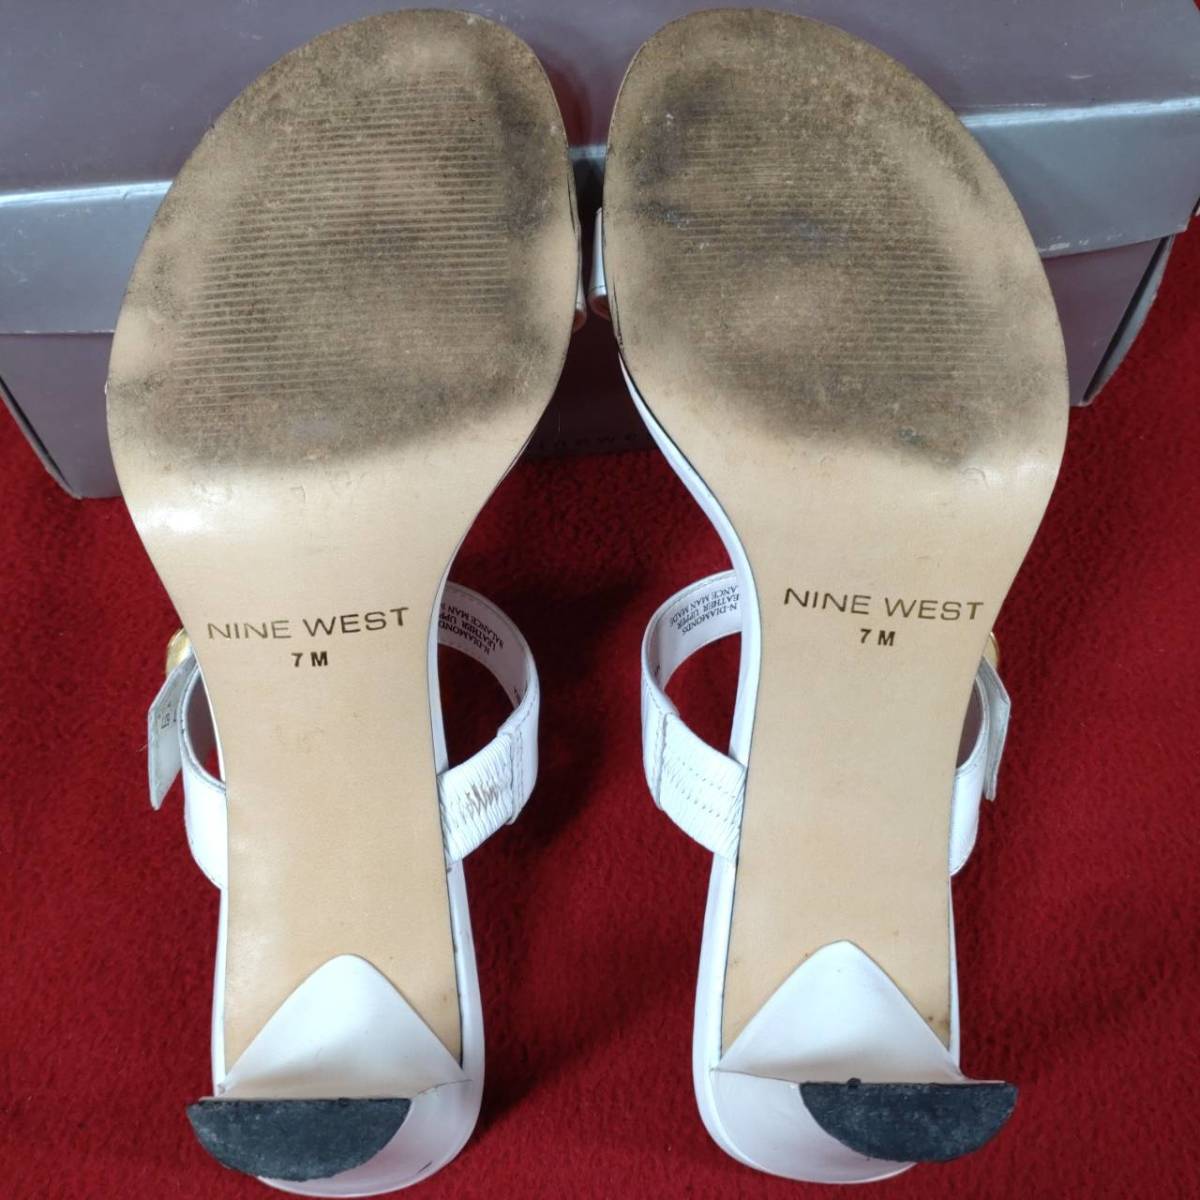 ③ Nine West NINE WEST mules 7M Japan size 24cm white sandals lady's fashion casual na in waste to